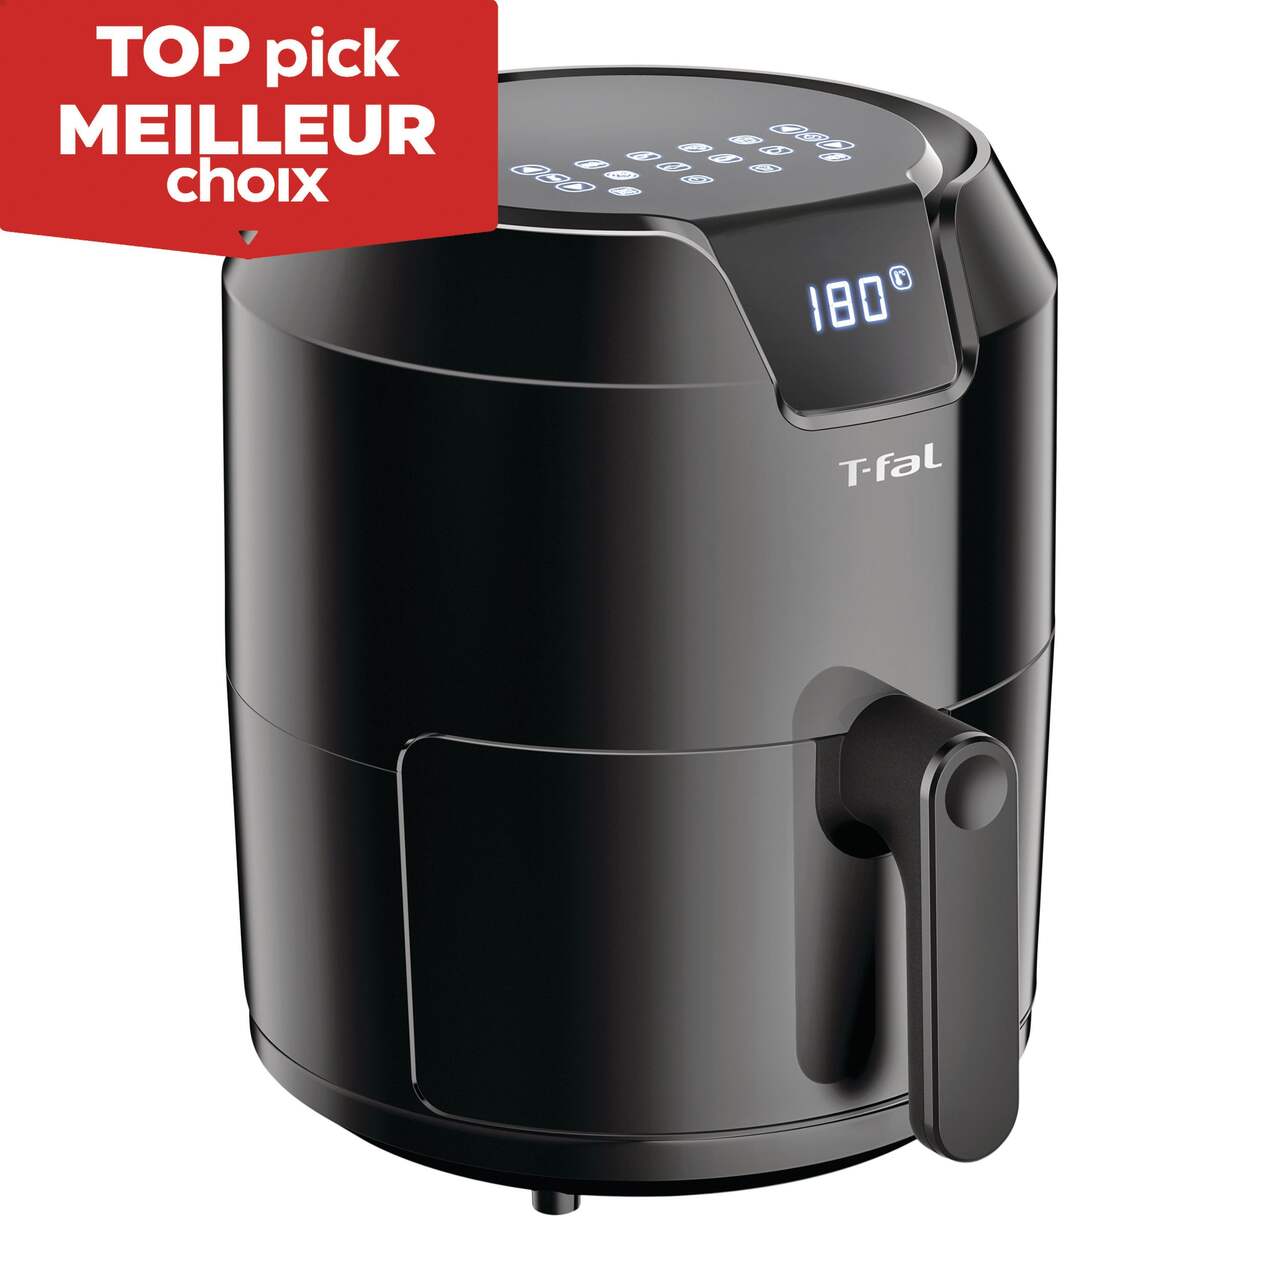 Tefal easy fry and grill precision air fryer